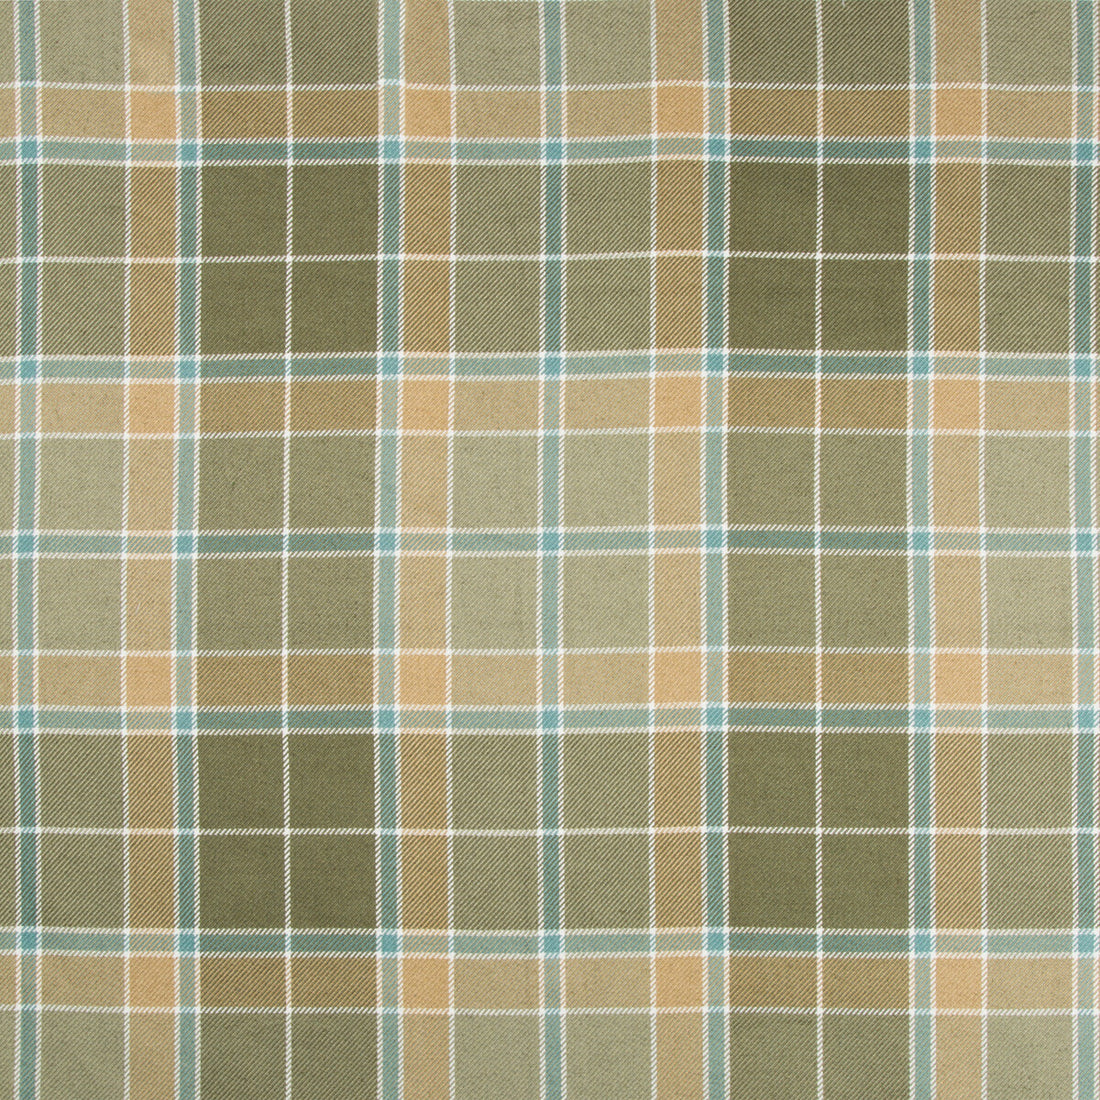 Handsome Plaid fabric in boxwood color - pattern 34793.340.0 - by Kravet Couture in the David Phoenix Well-Suited collection